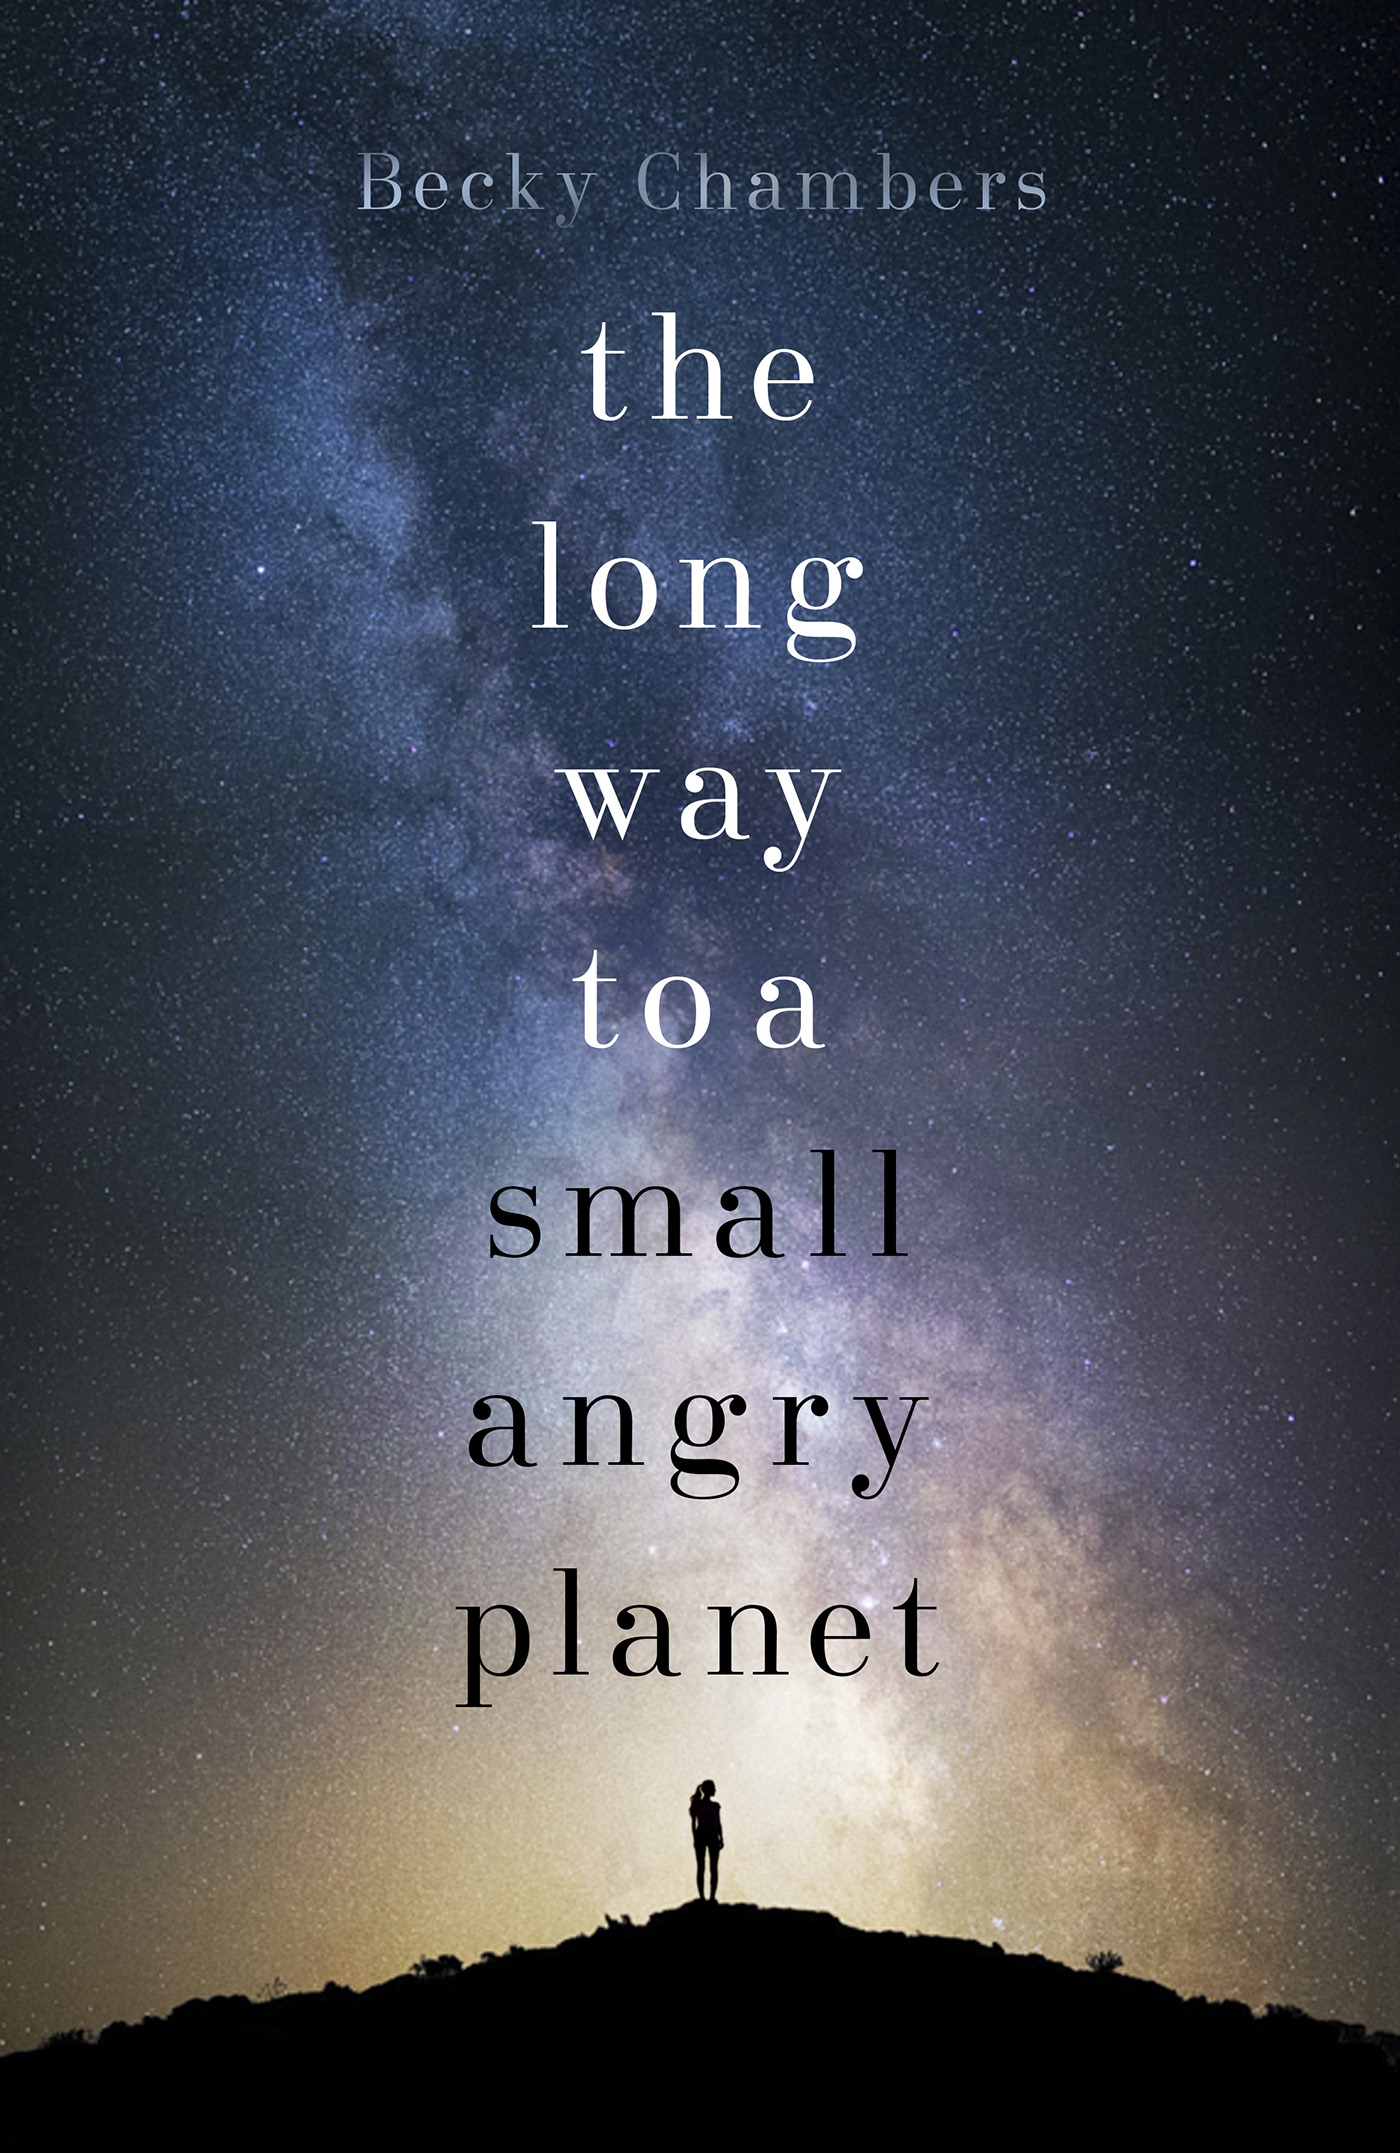 Becky Chambers: The Long Way to a Small Angry Planet (2015, Hodder & Stoughton)